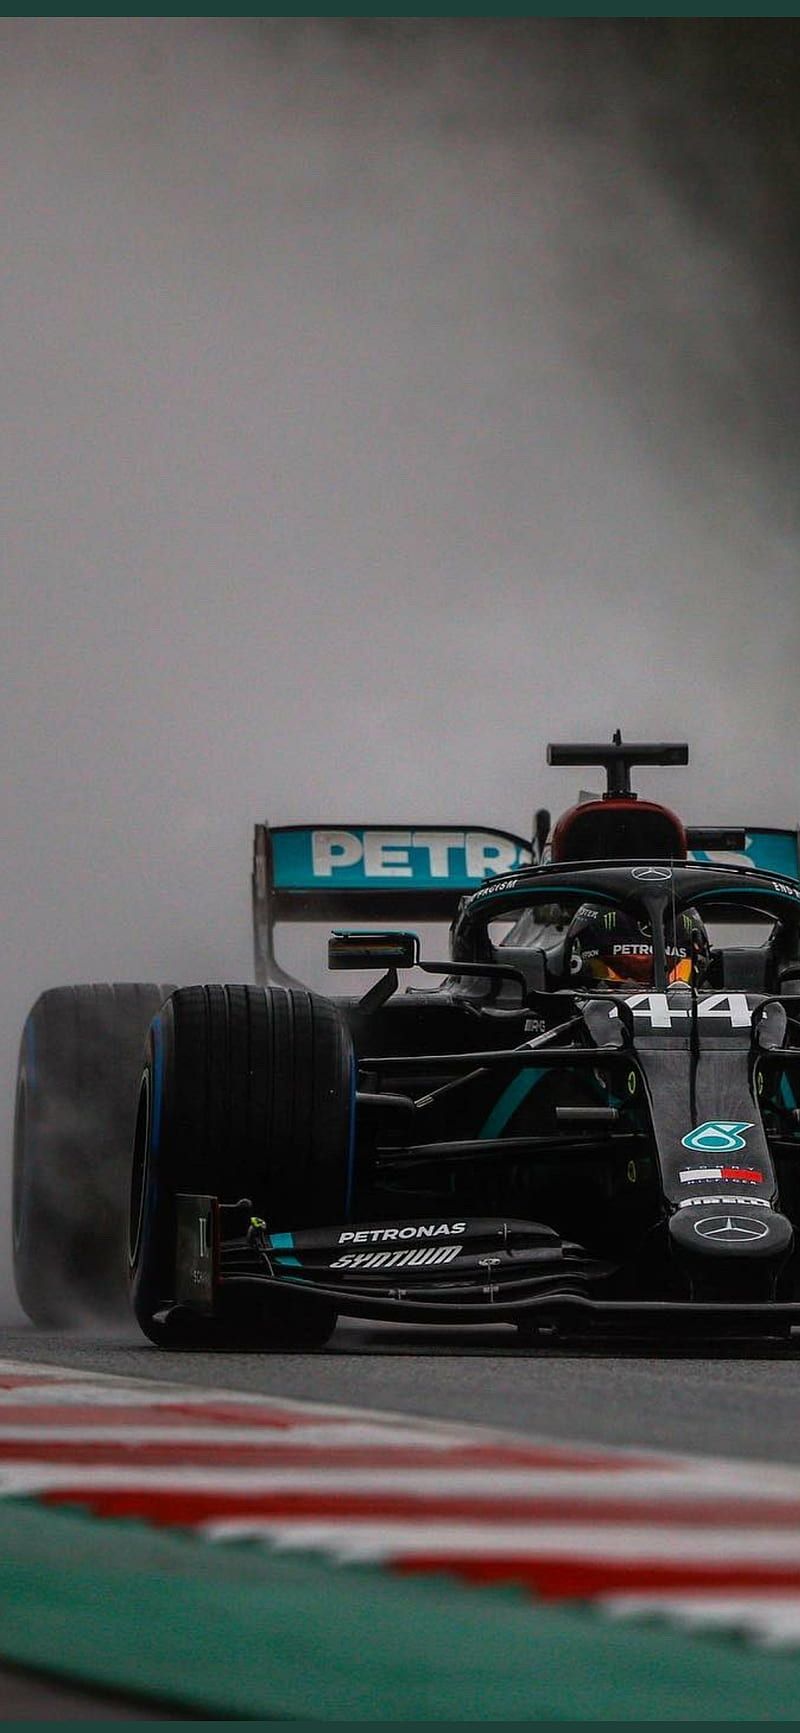 Lewis Hamilton driving his car on a track with a cloud in the sky. - Lewis Hamilton